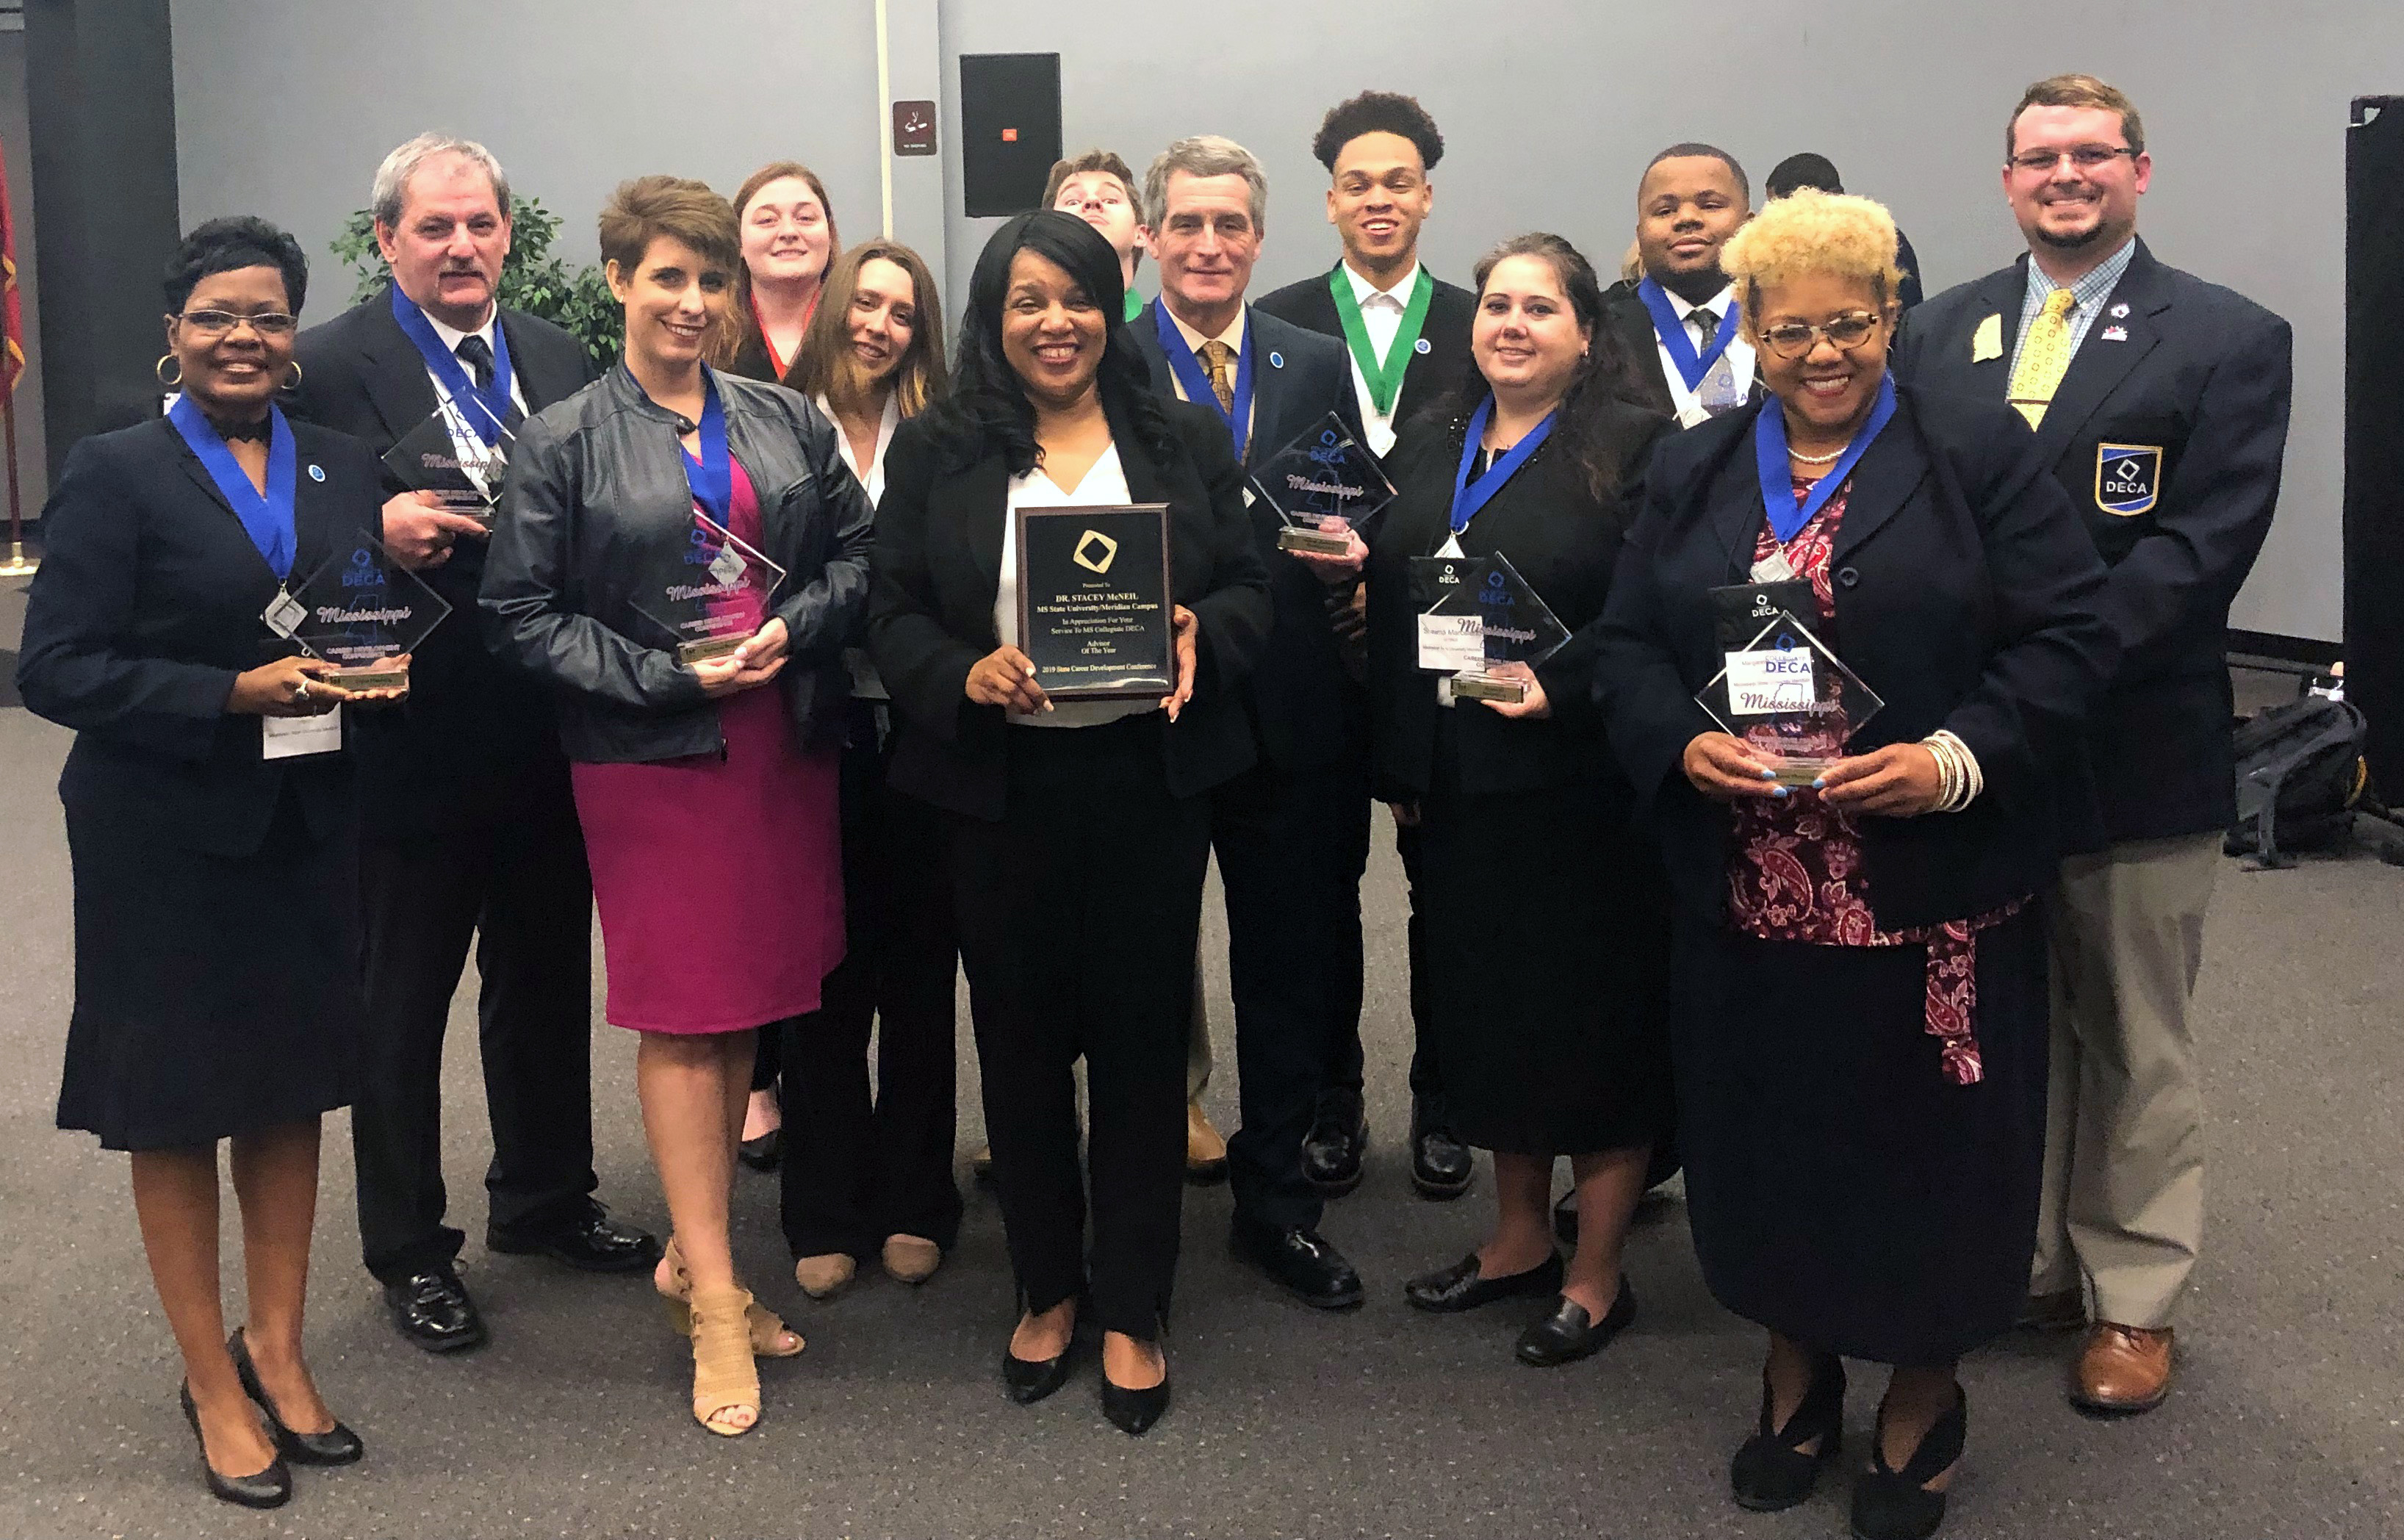 Dr. Stacey McNeil (front, third from left) was named Mississippi Collegiate DECA Advisor of the Year at the 2019 statewide convention. Here she is surrounded by MSU-Meridian DECA members, who turned in strong performances in the conference competitions.